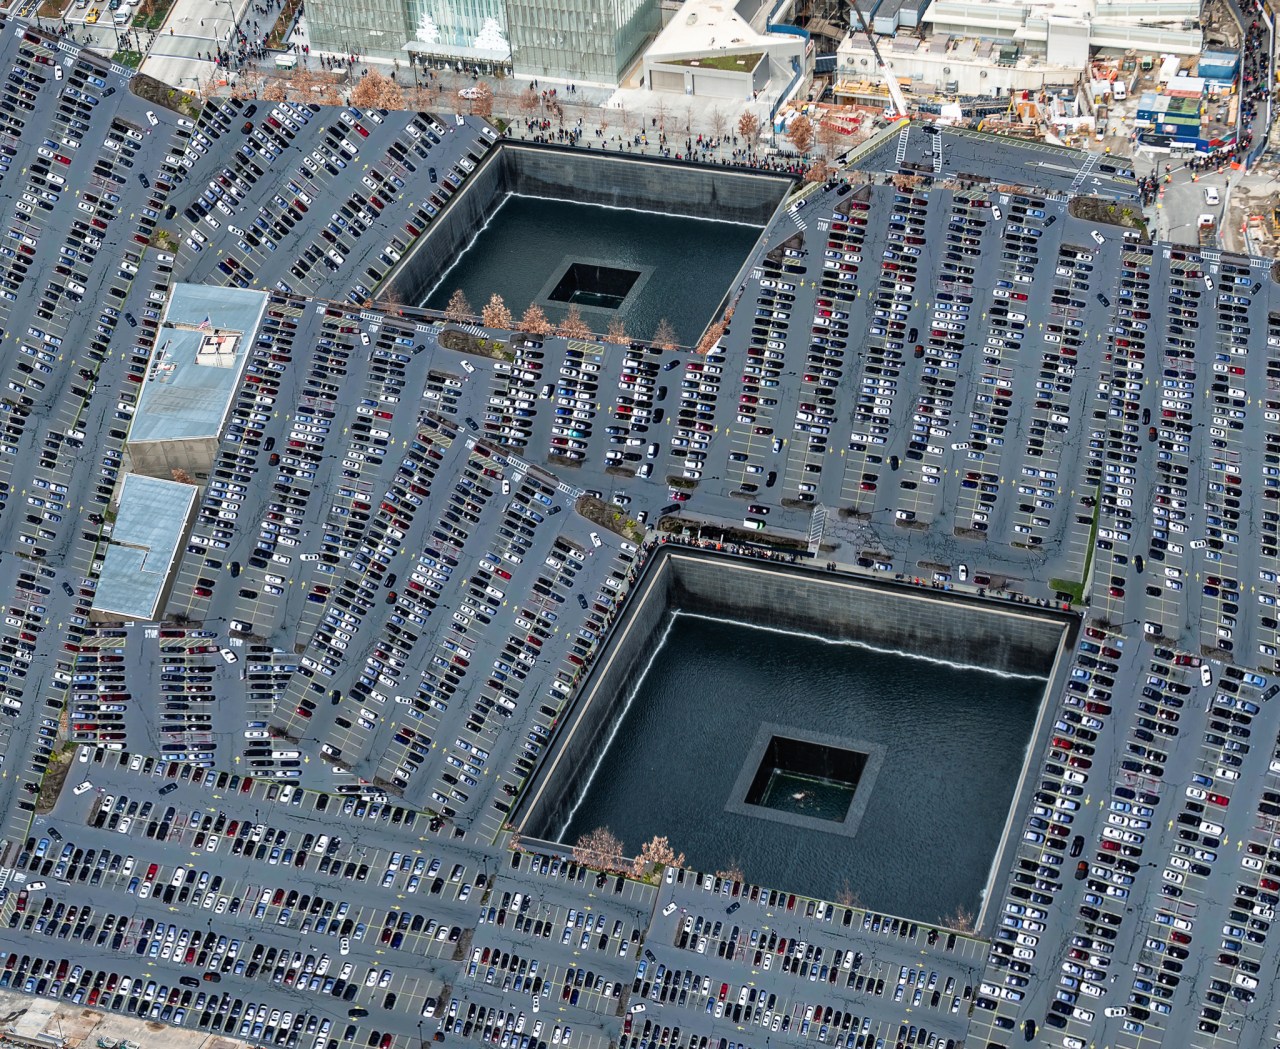 Here's the 9/11 Memorial with ample space for everyone to drive there. Photo: Streetsblog Photoshop Desk